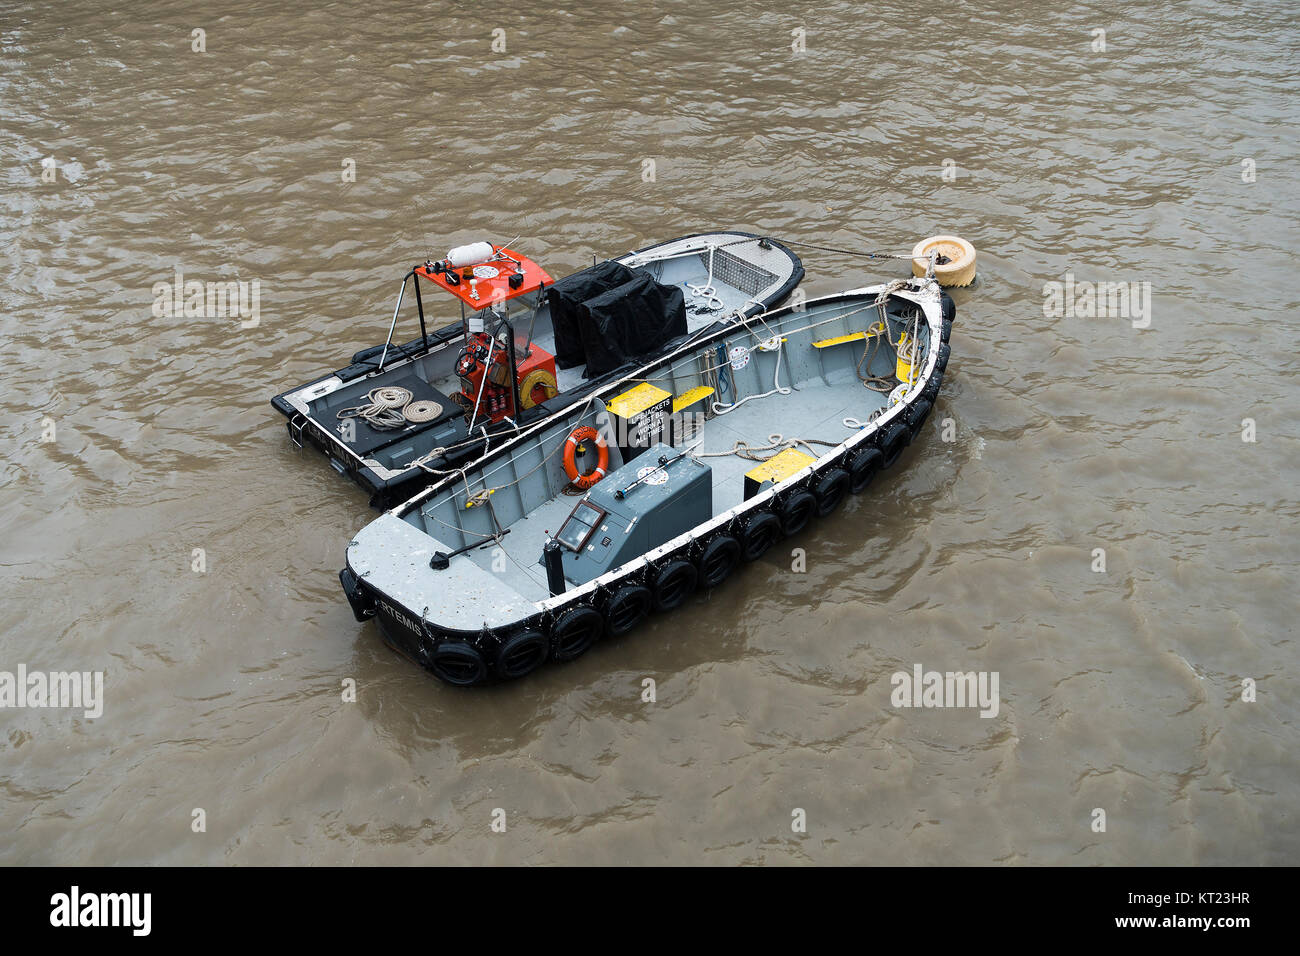 Two Livetts Safety Boats Artemis and Lima Lima Moored in the River Thames near HMS Belfast London England United Kingdom UK Stock Photo